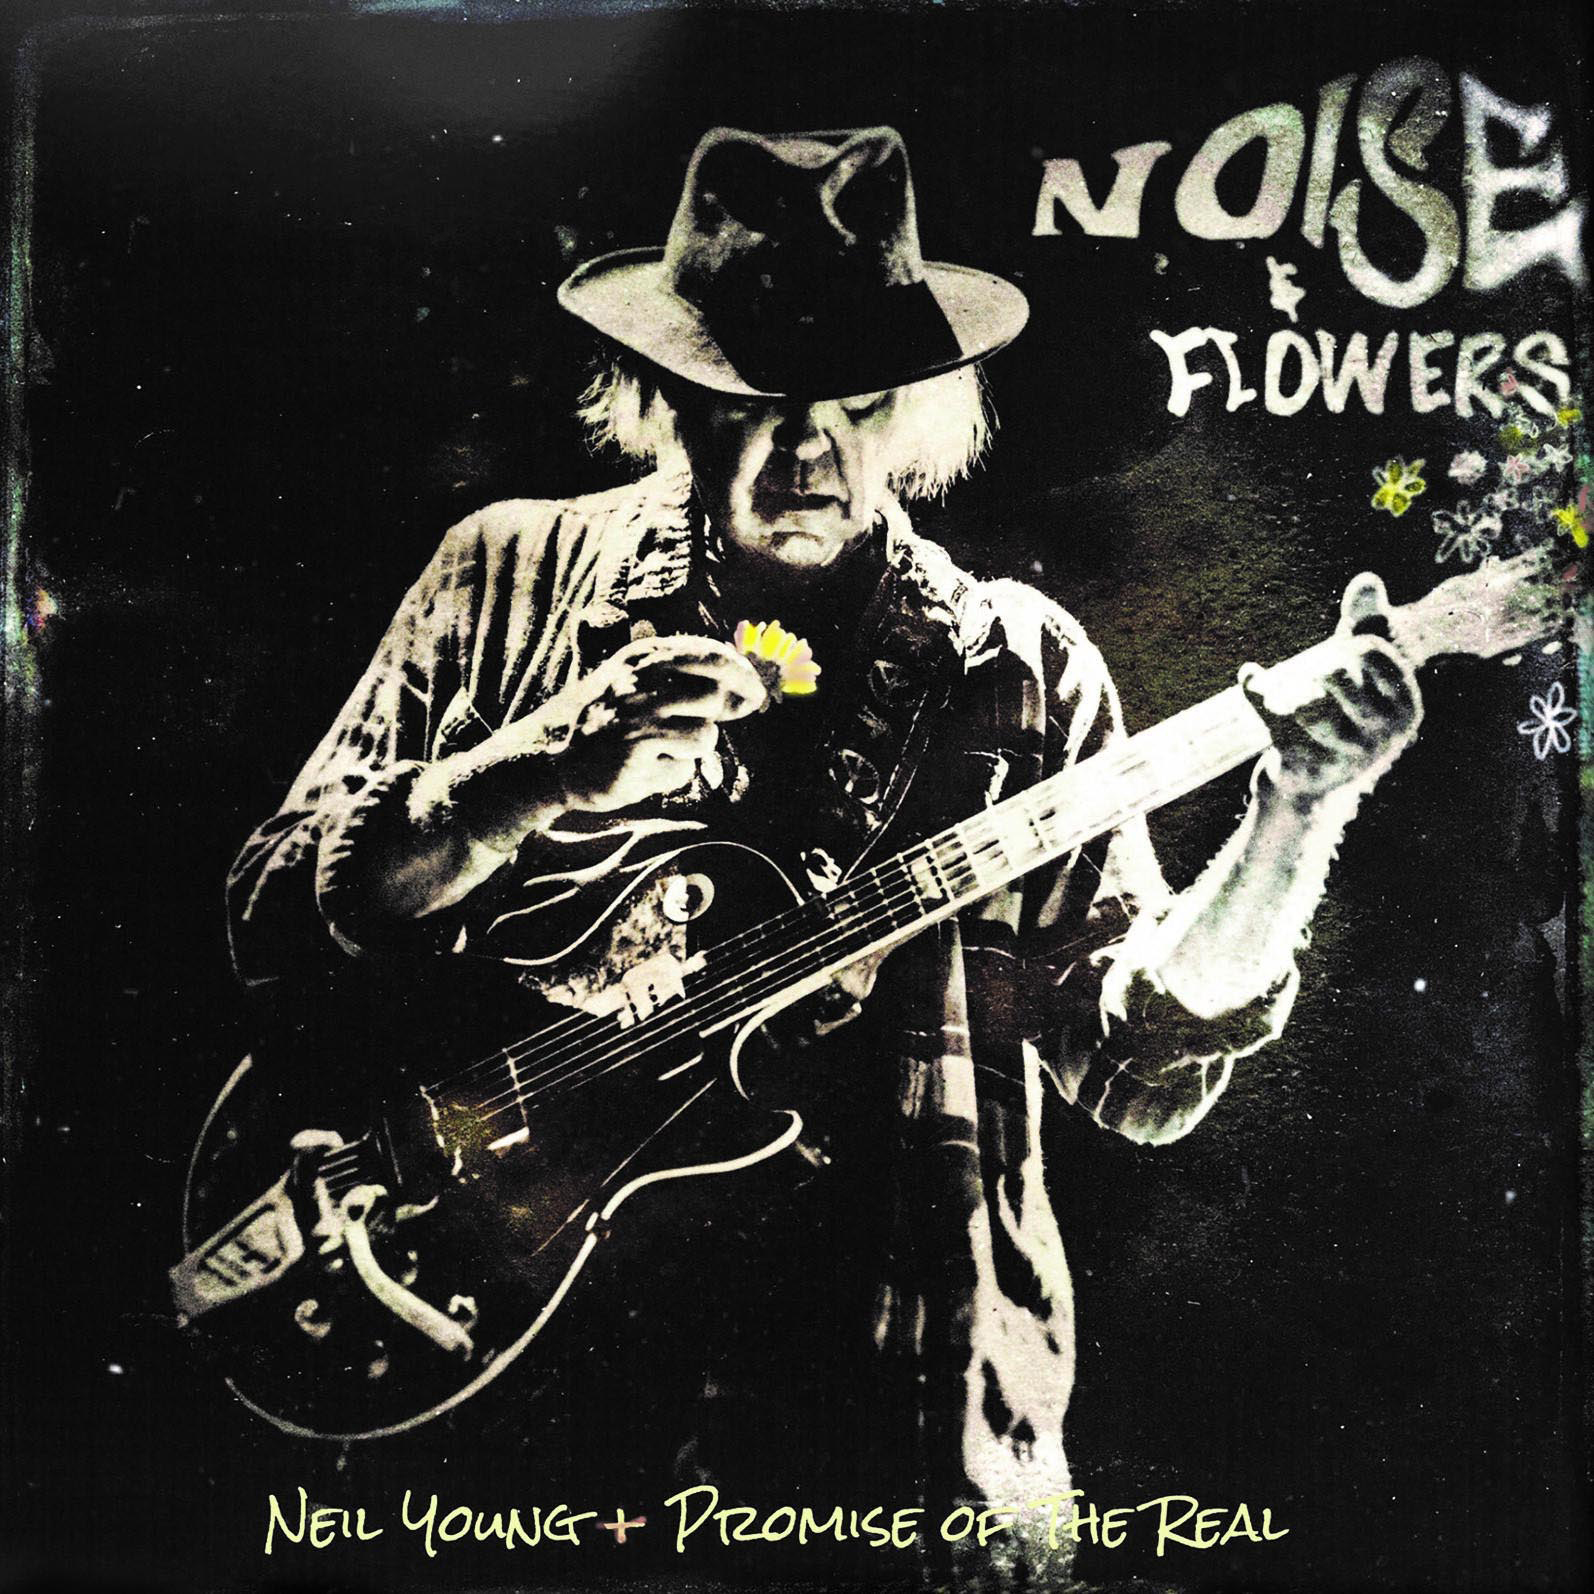 Neil Young + Promise (Box The - - Real set) NOISE Of And FLOWERS